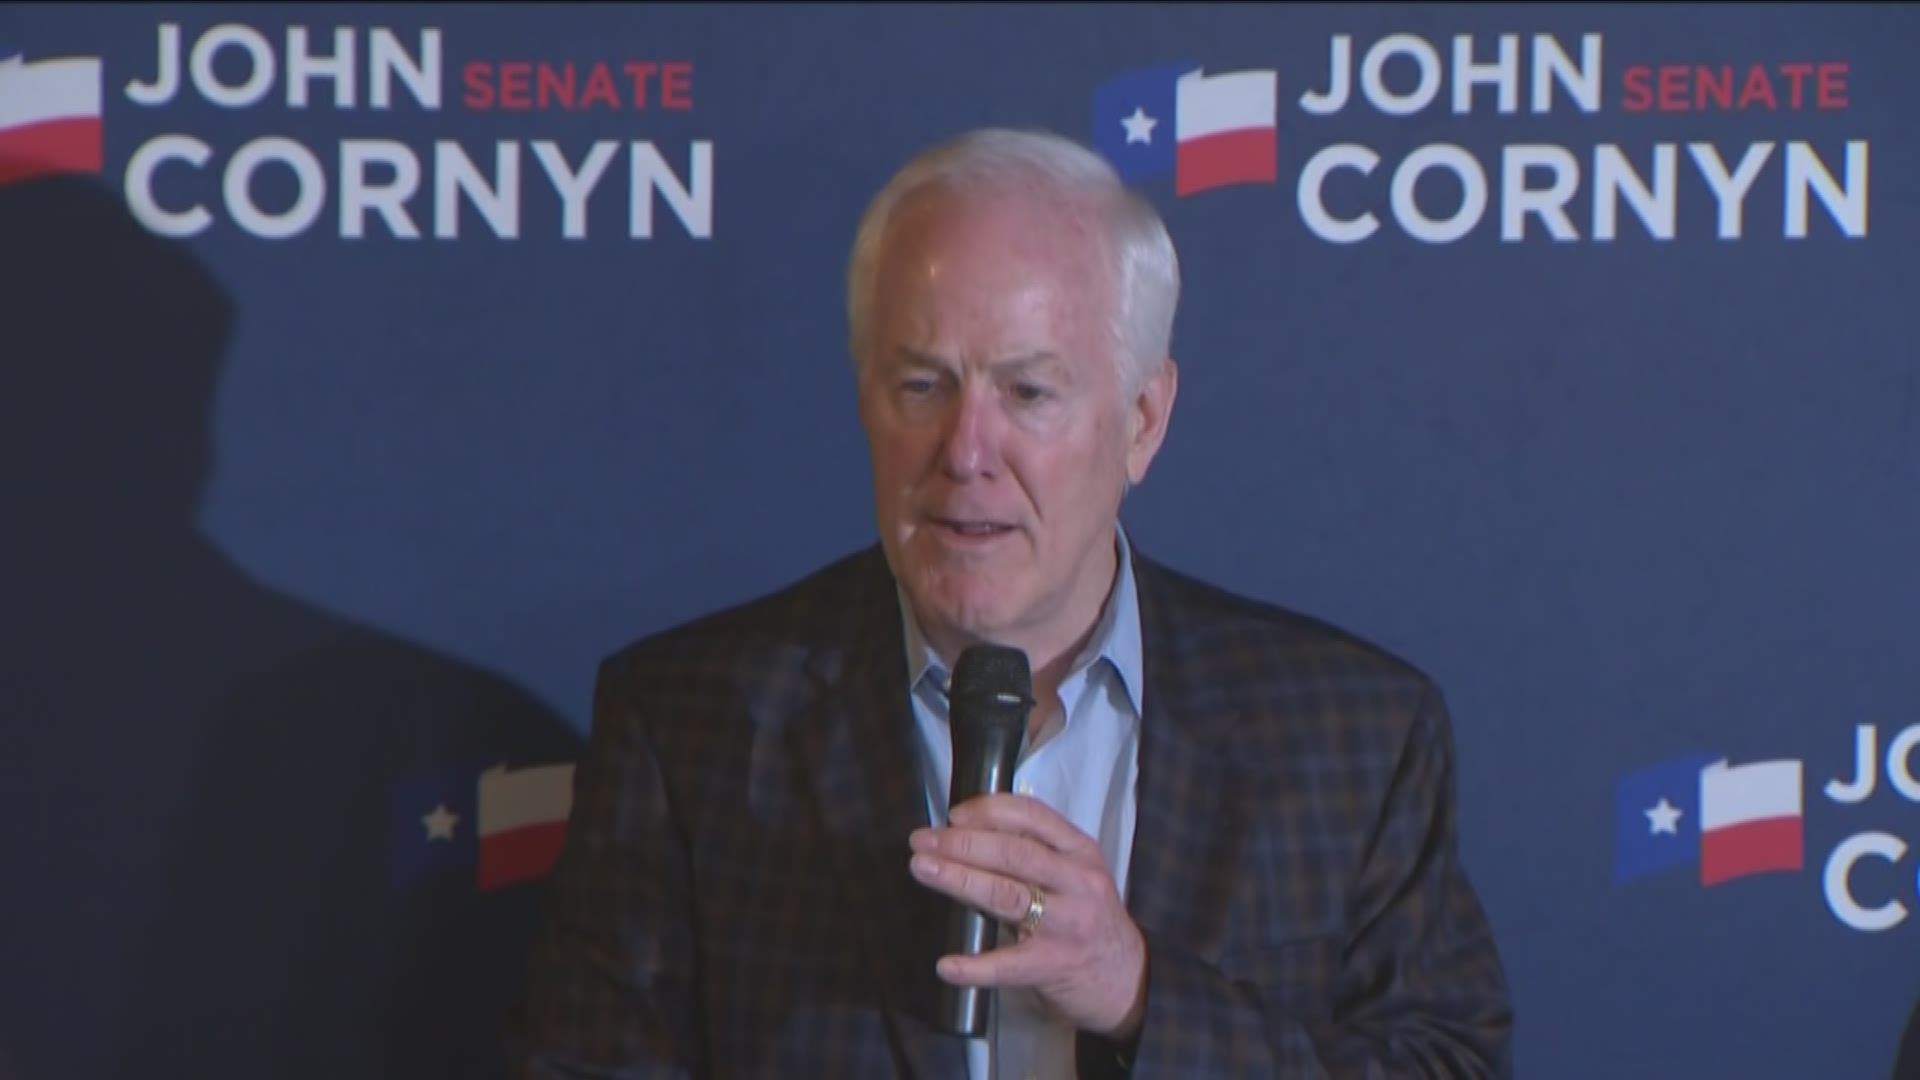 U.S. Sen. John Cornyn gave his acceptance speech at The County Line in Austin after winning the 2020 Republican nomination in the Texas primary.